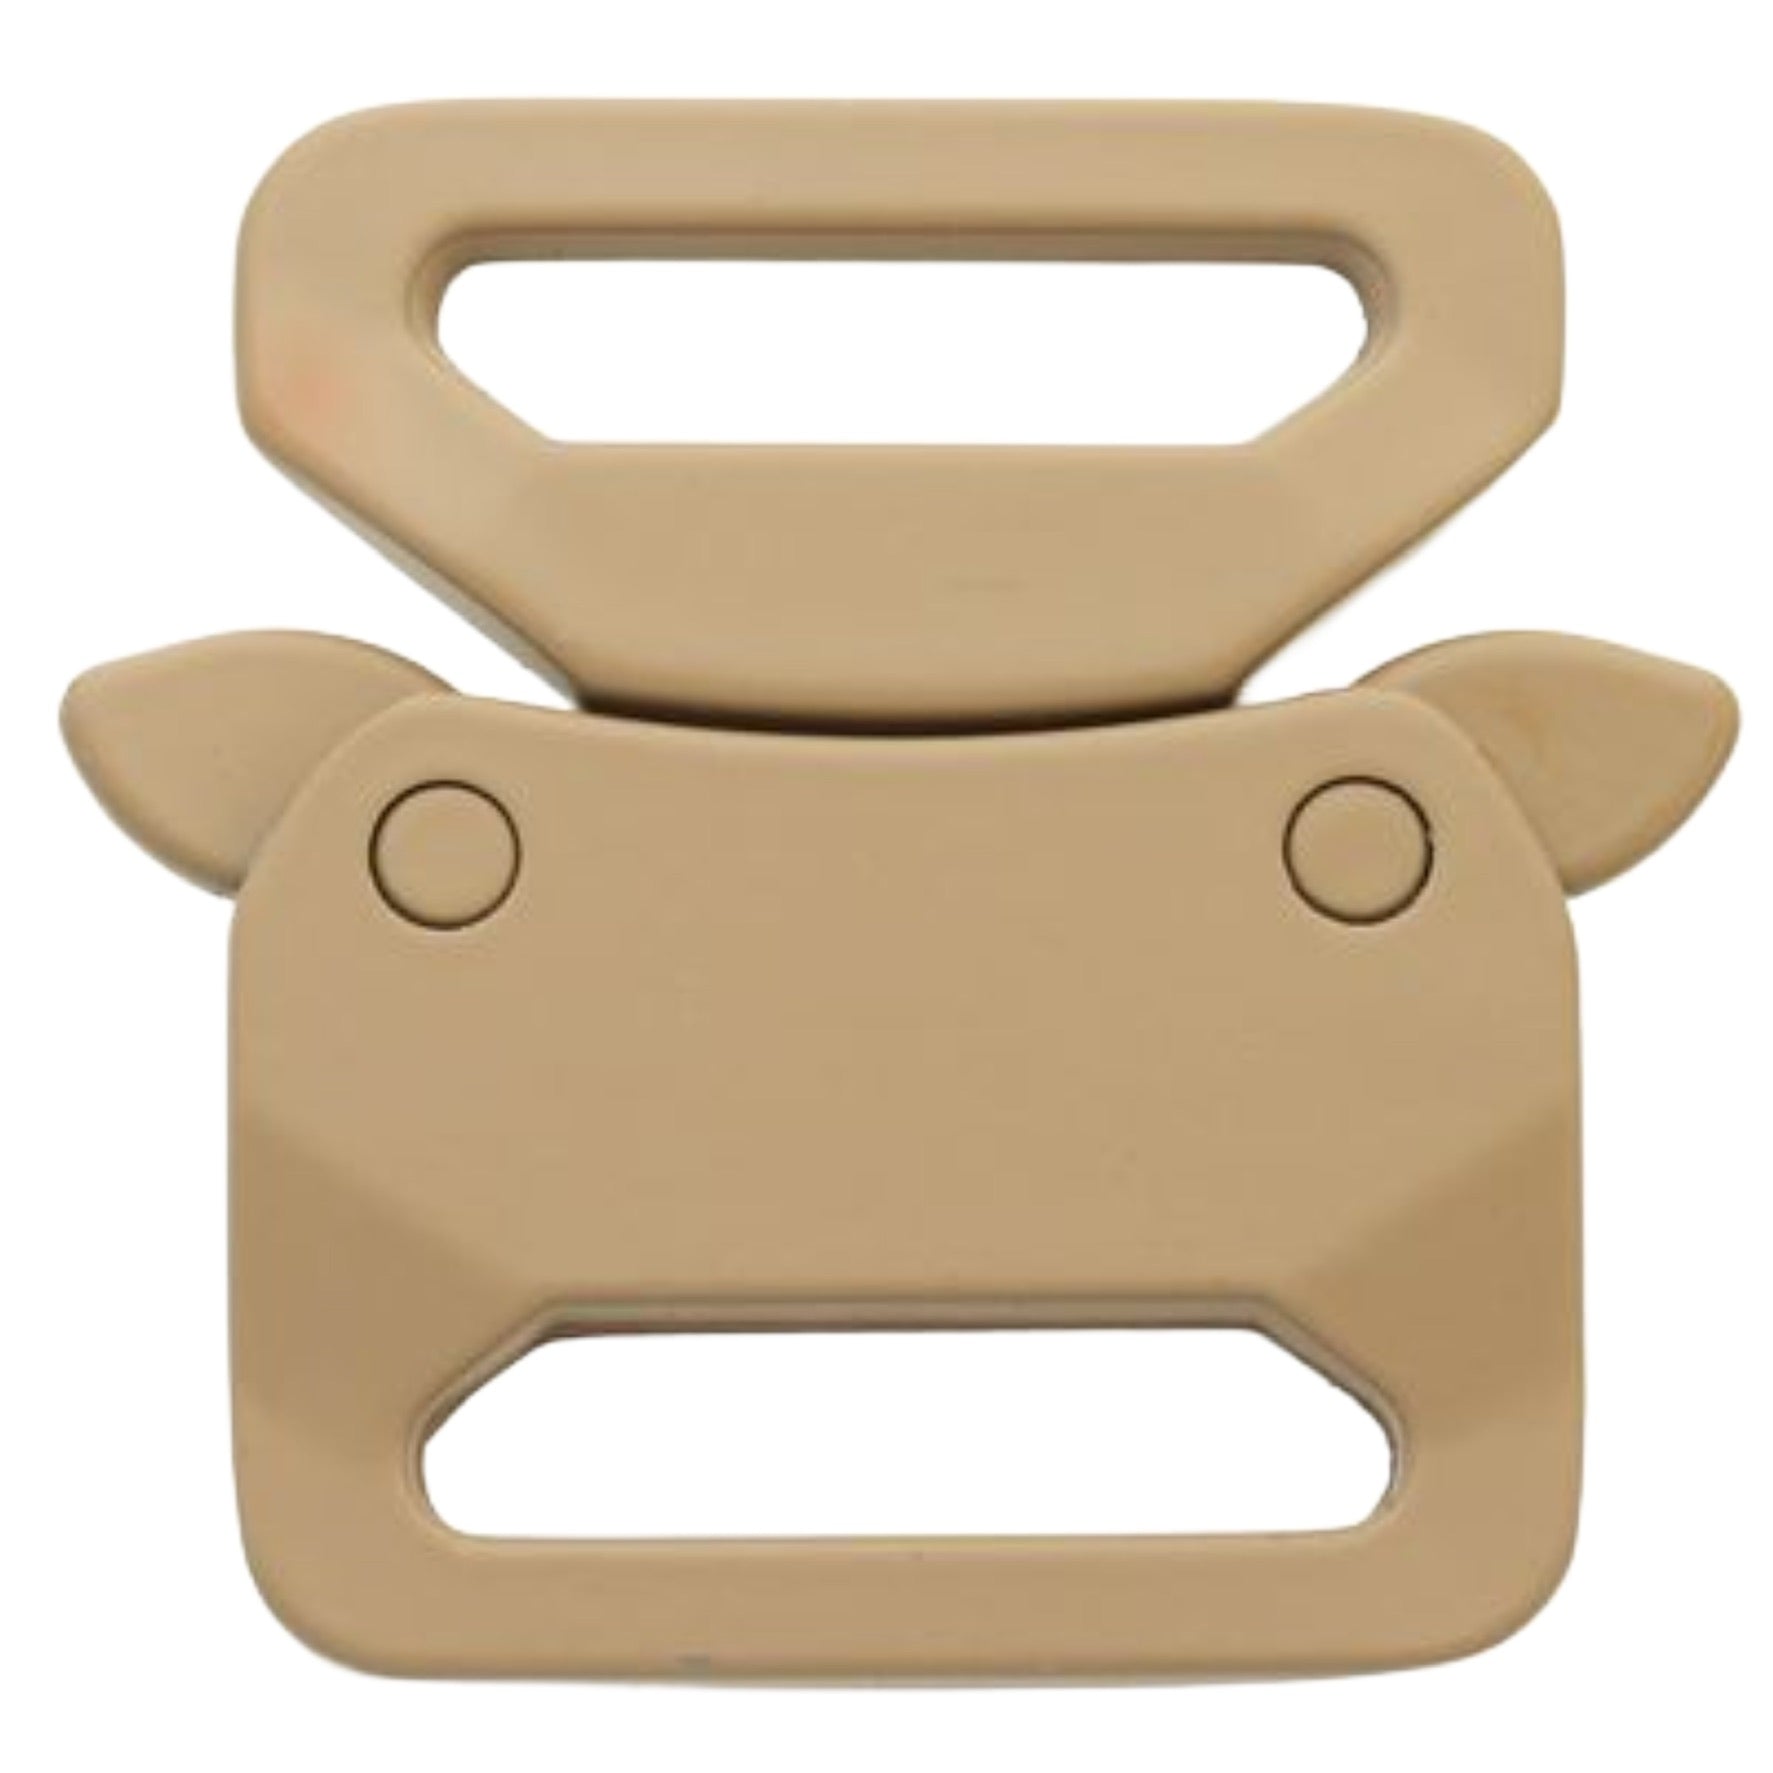 Two-tone quick release collar